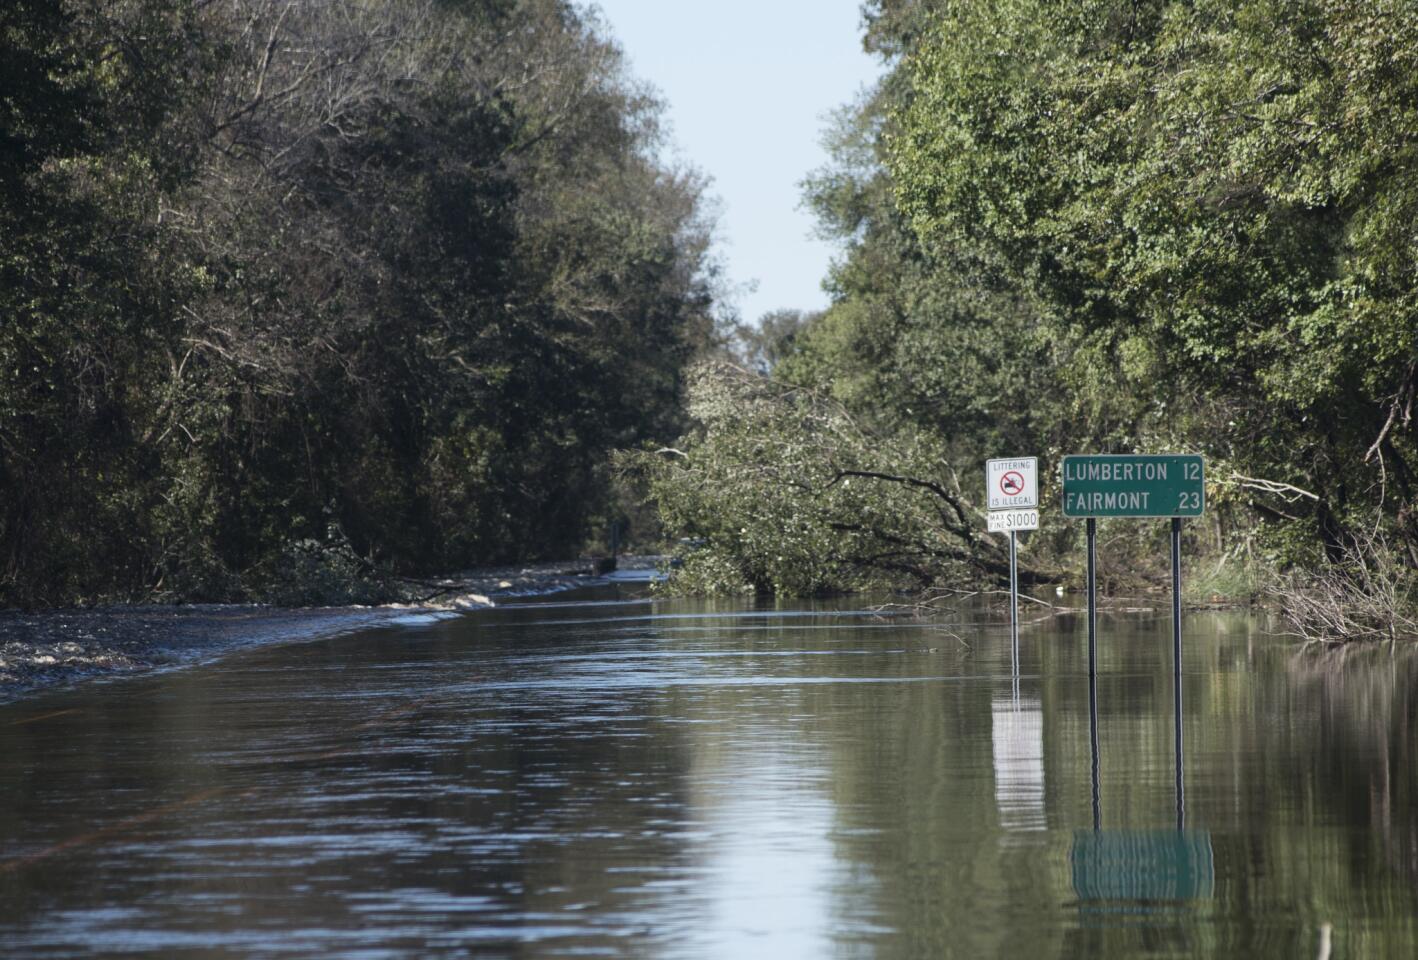 Floodwaters caused by rain from Hurricane Matthew block N.C. Highway 41 outside of Lumberton, N.C., on Oct. 10, 2016.